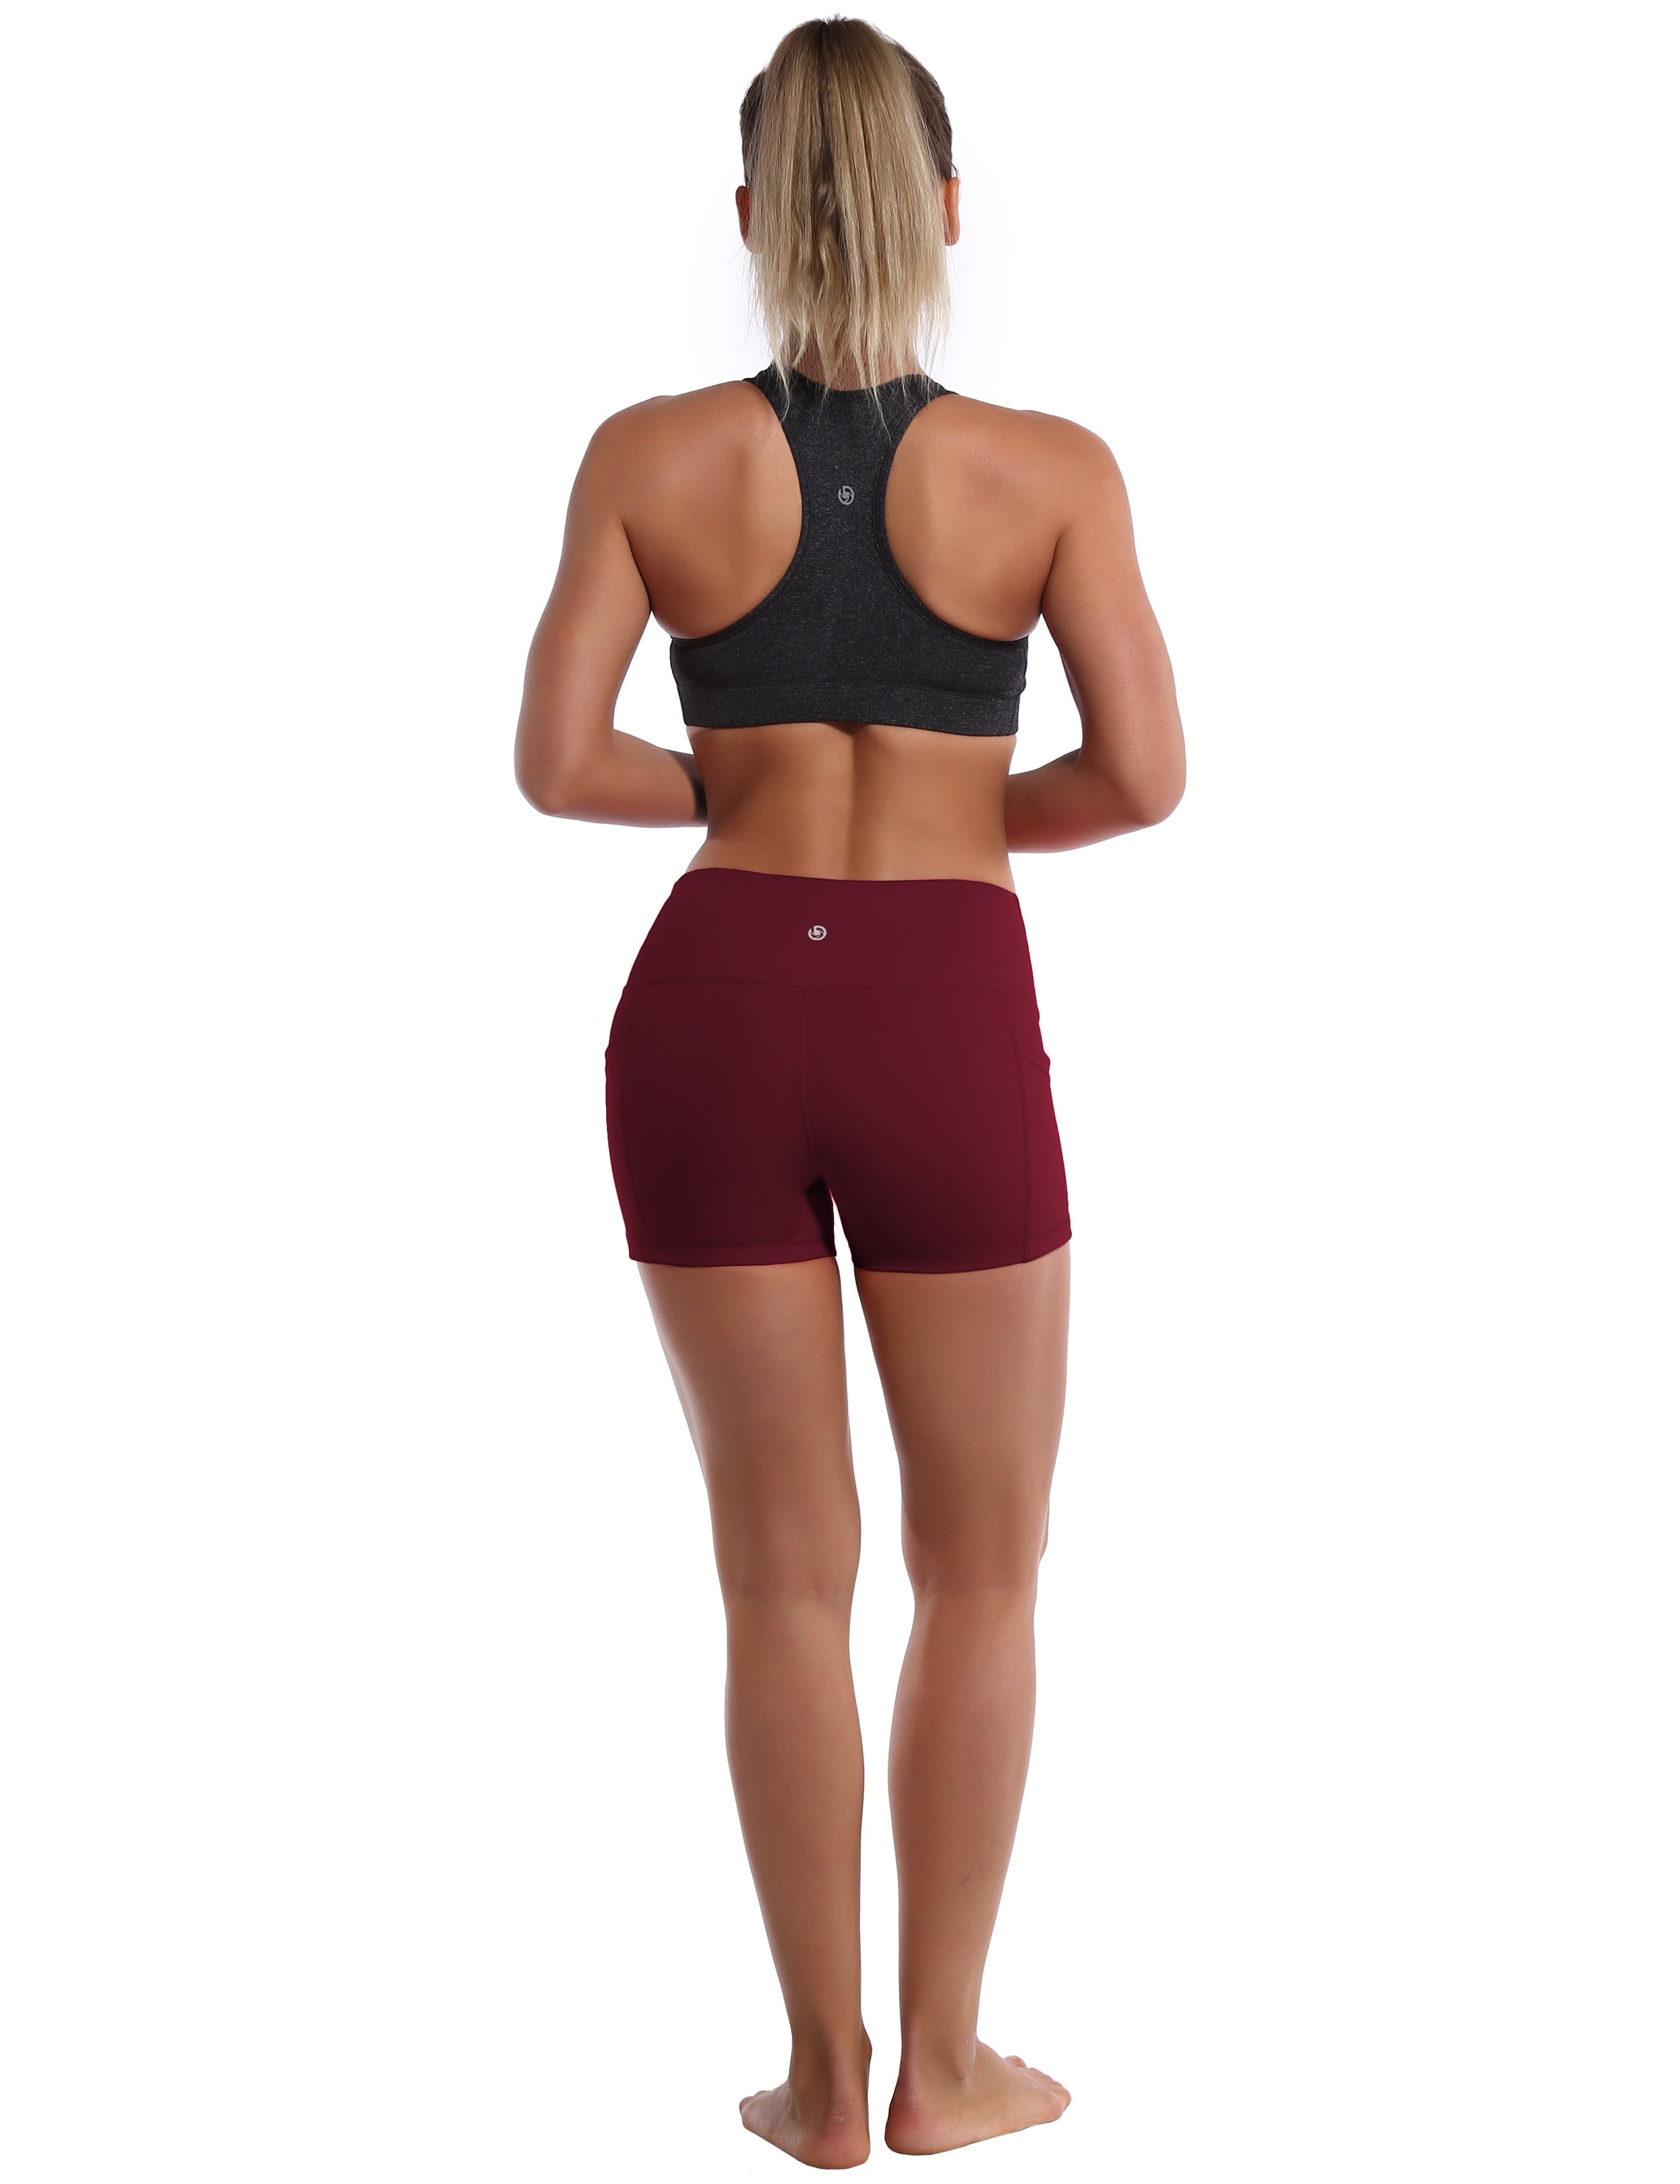 2.5" Side Pockets Tall Size Shorts cherryred Sleek, soft, smooth and totally comfortable: our newest sexy style is here. Softest-ever fabric High elasticity High density 4-way stretch Fabric doesn't attract lint easily No see-through Moisture-wicking Machine wash 78% Polyester, 22% Spandex